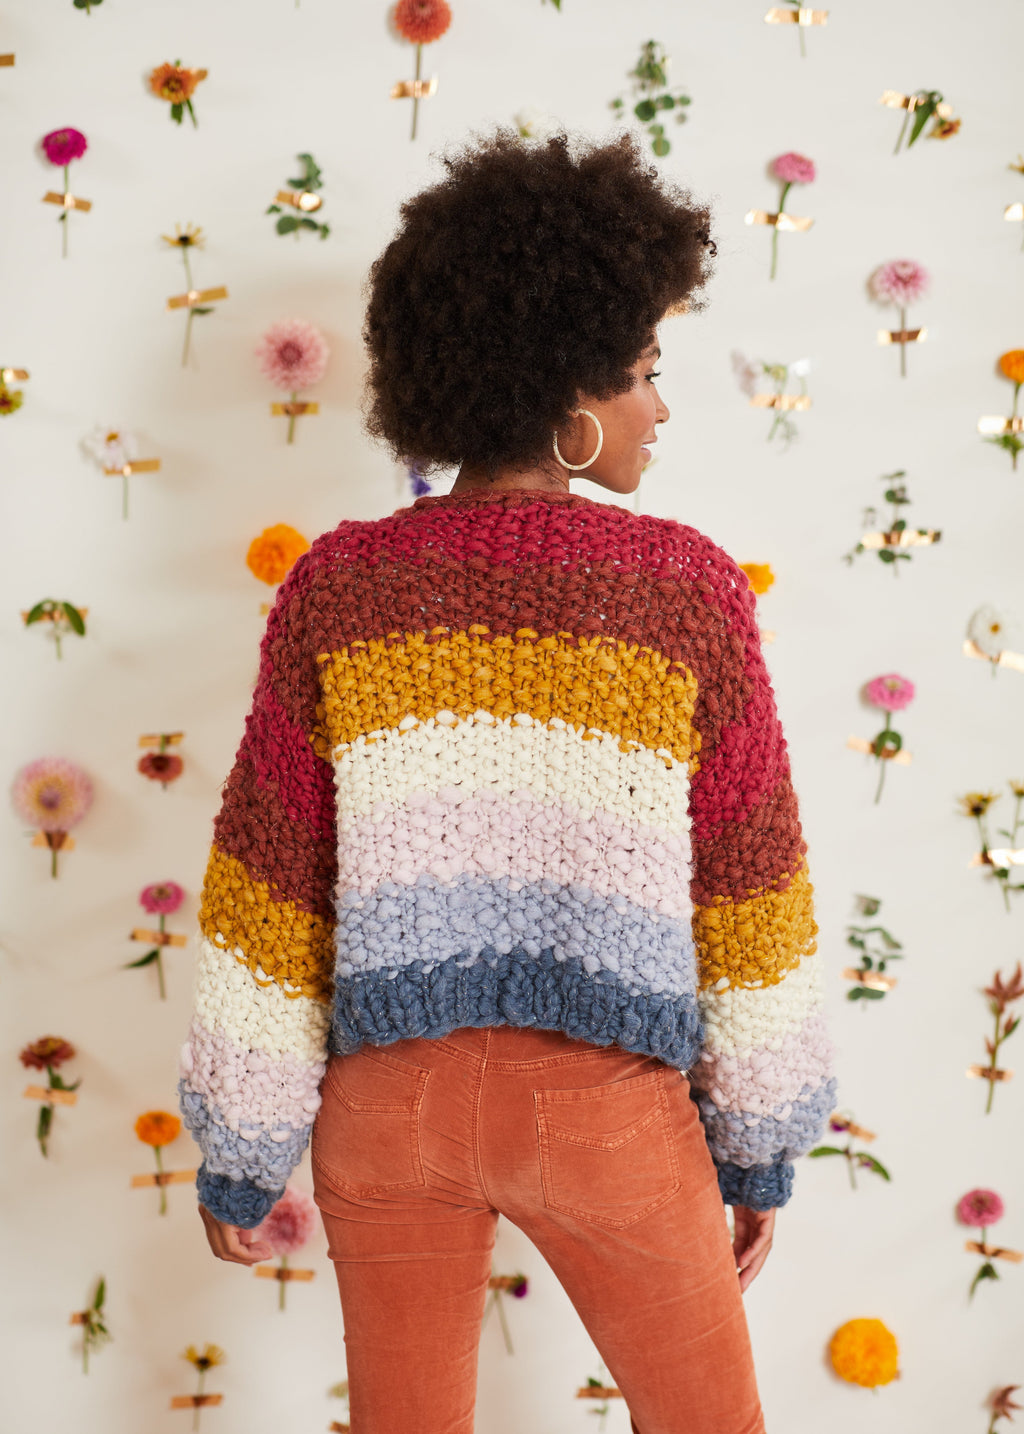 Knit Collage Over the Rainbow Cardi Pattern